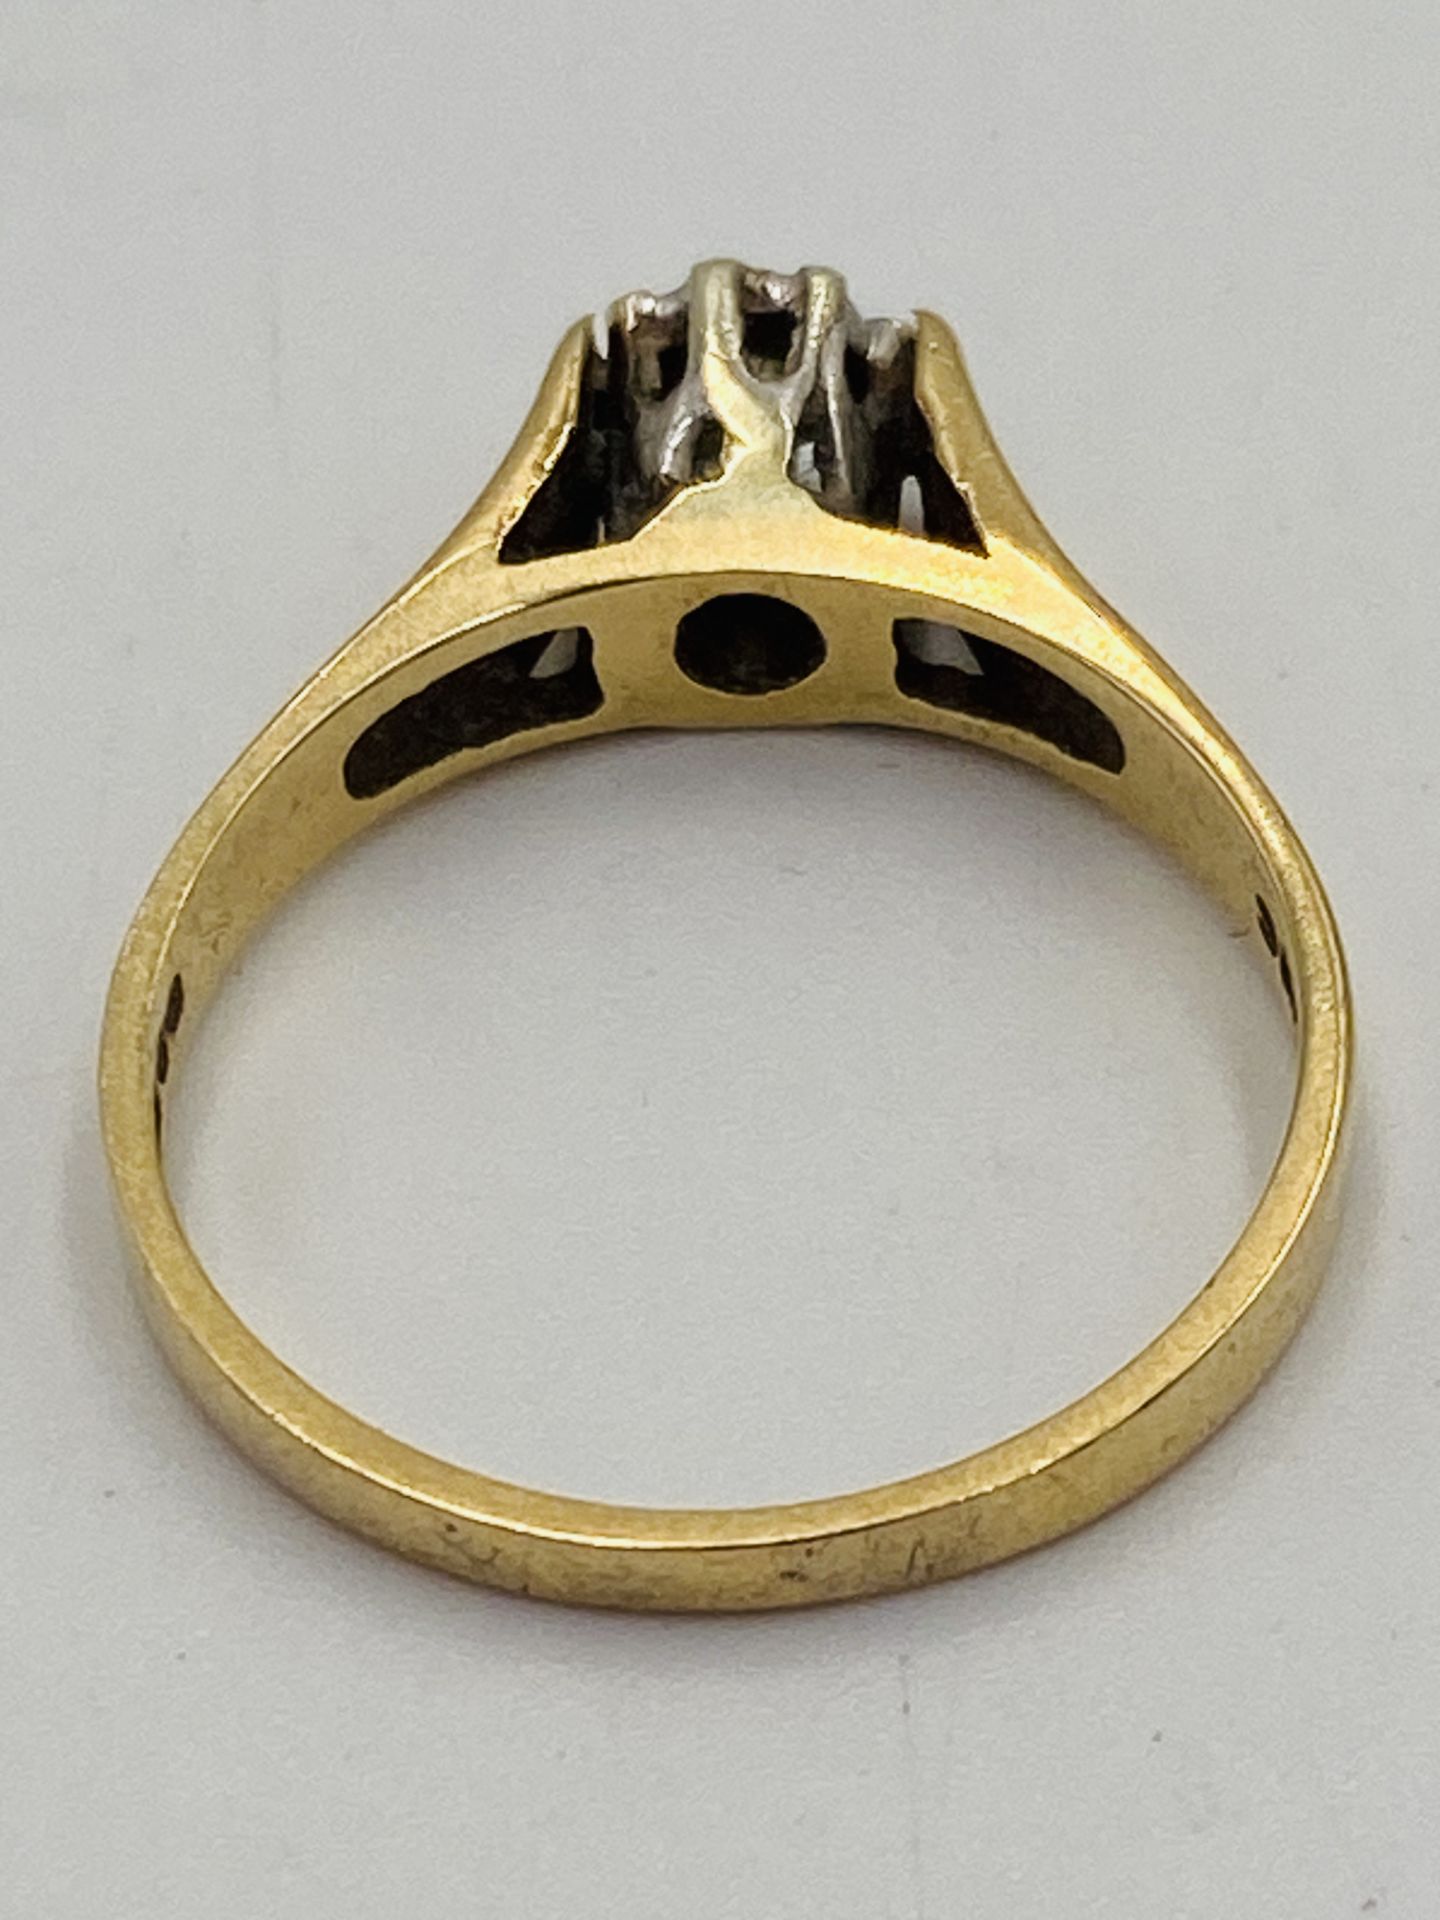 9ct gold solitaire ring - Image 5 of 6